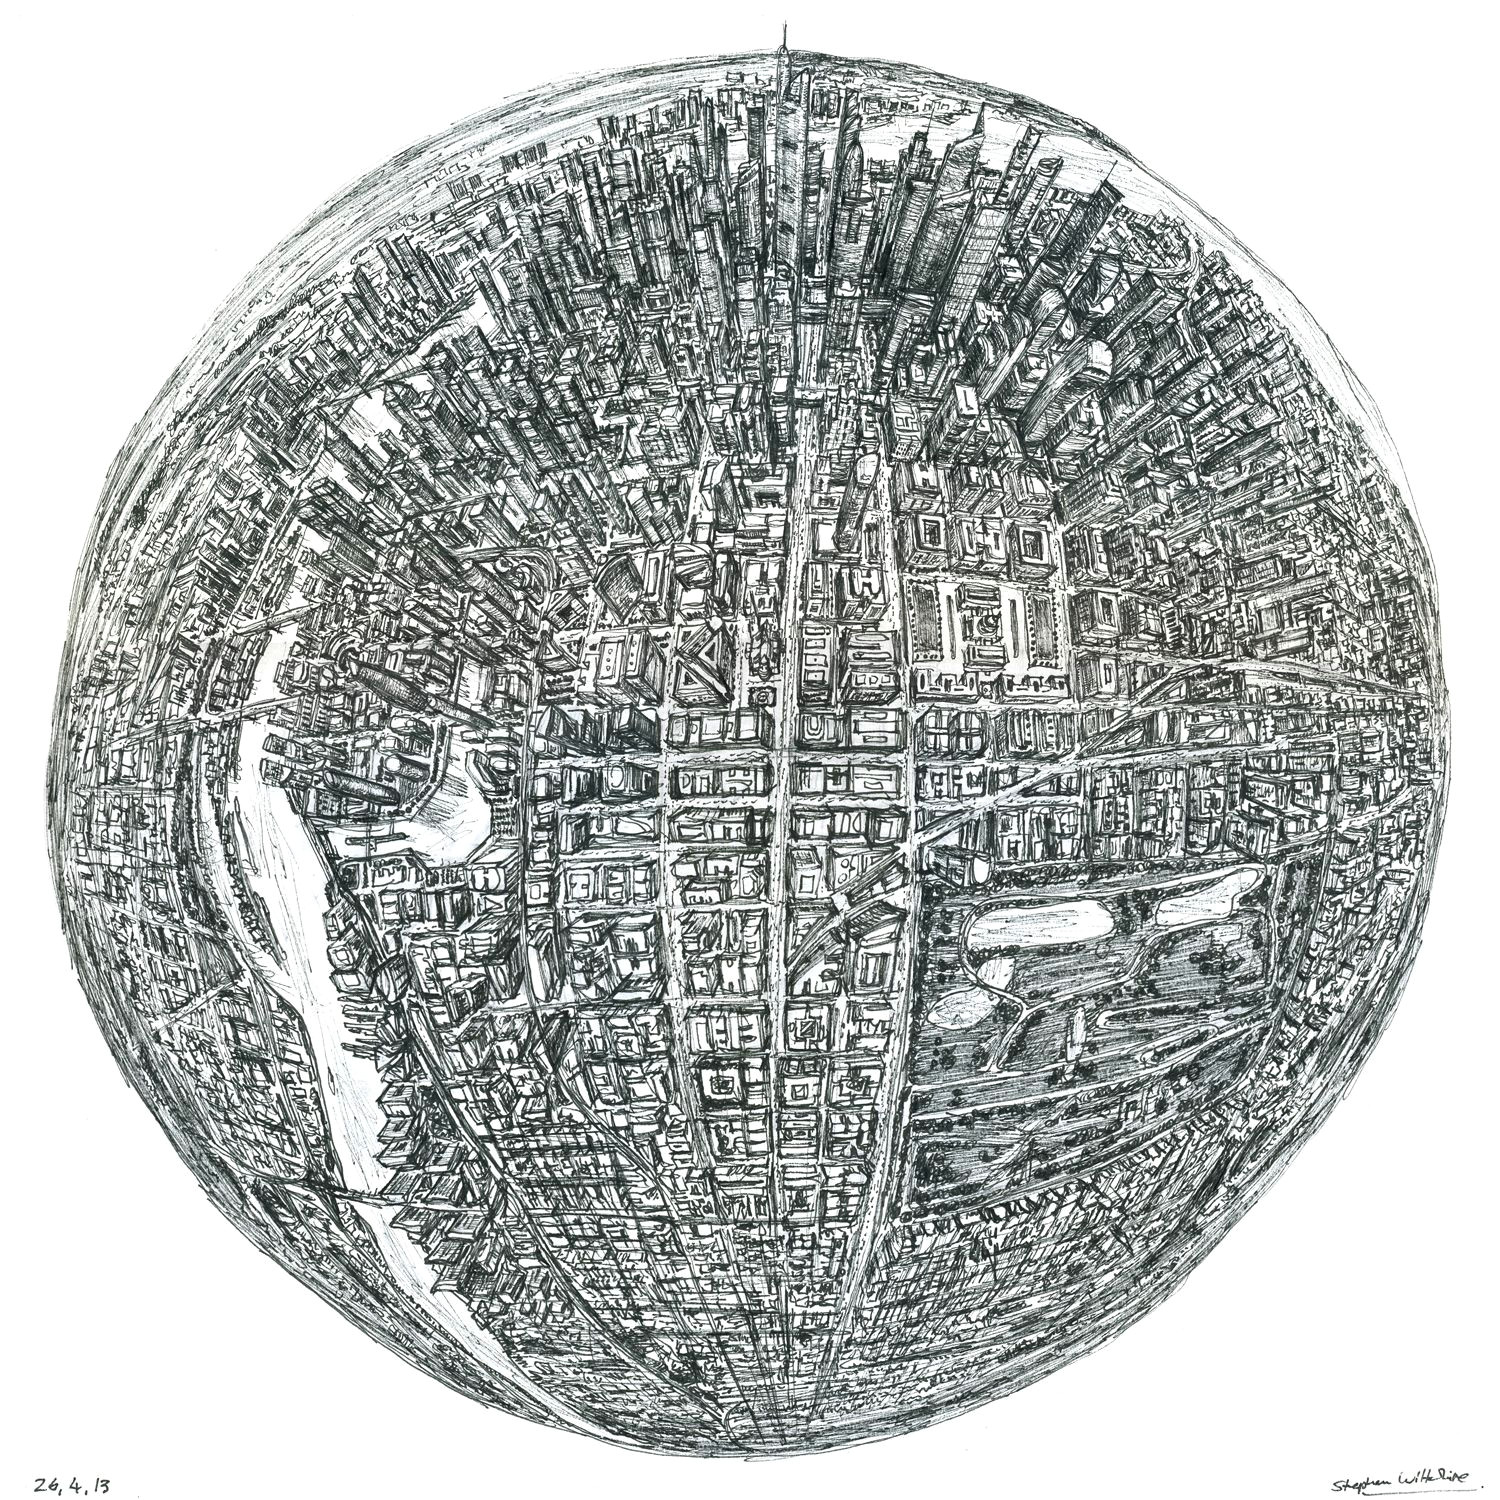 Drawing A Birds Eye Stephen Wiltshire S New Creation Titled Globe Of Imagination is